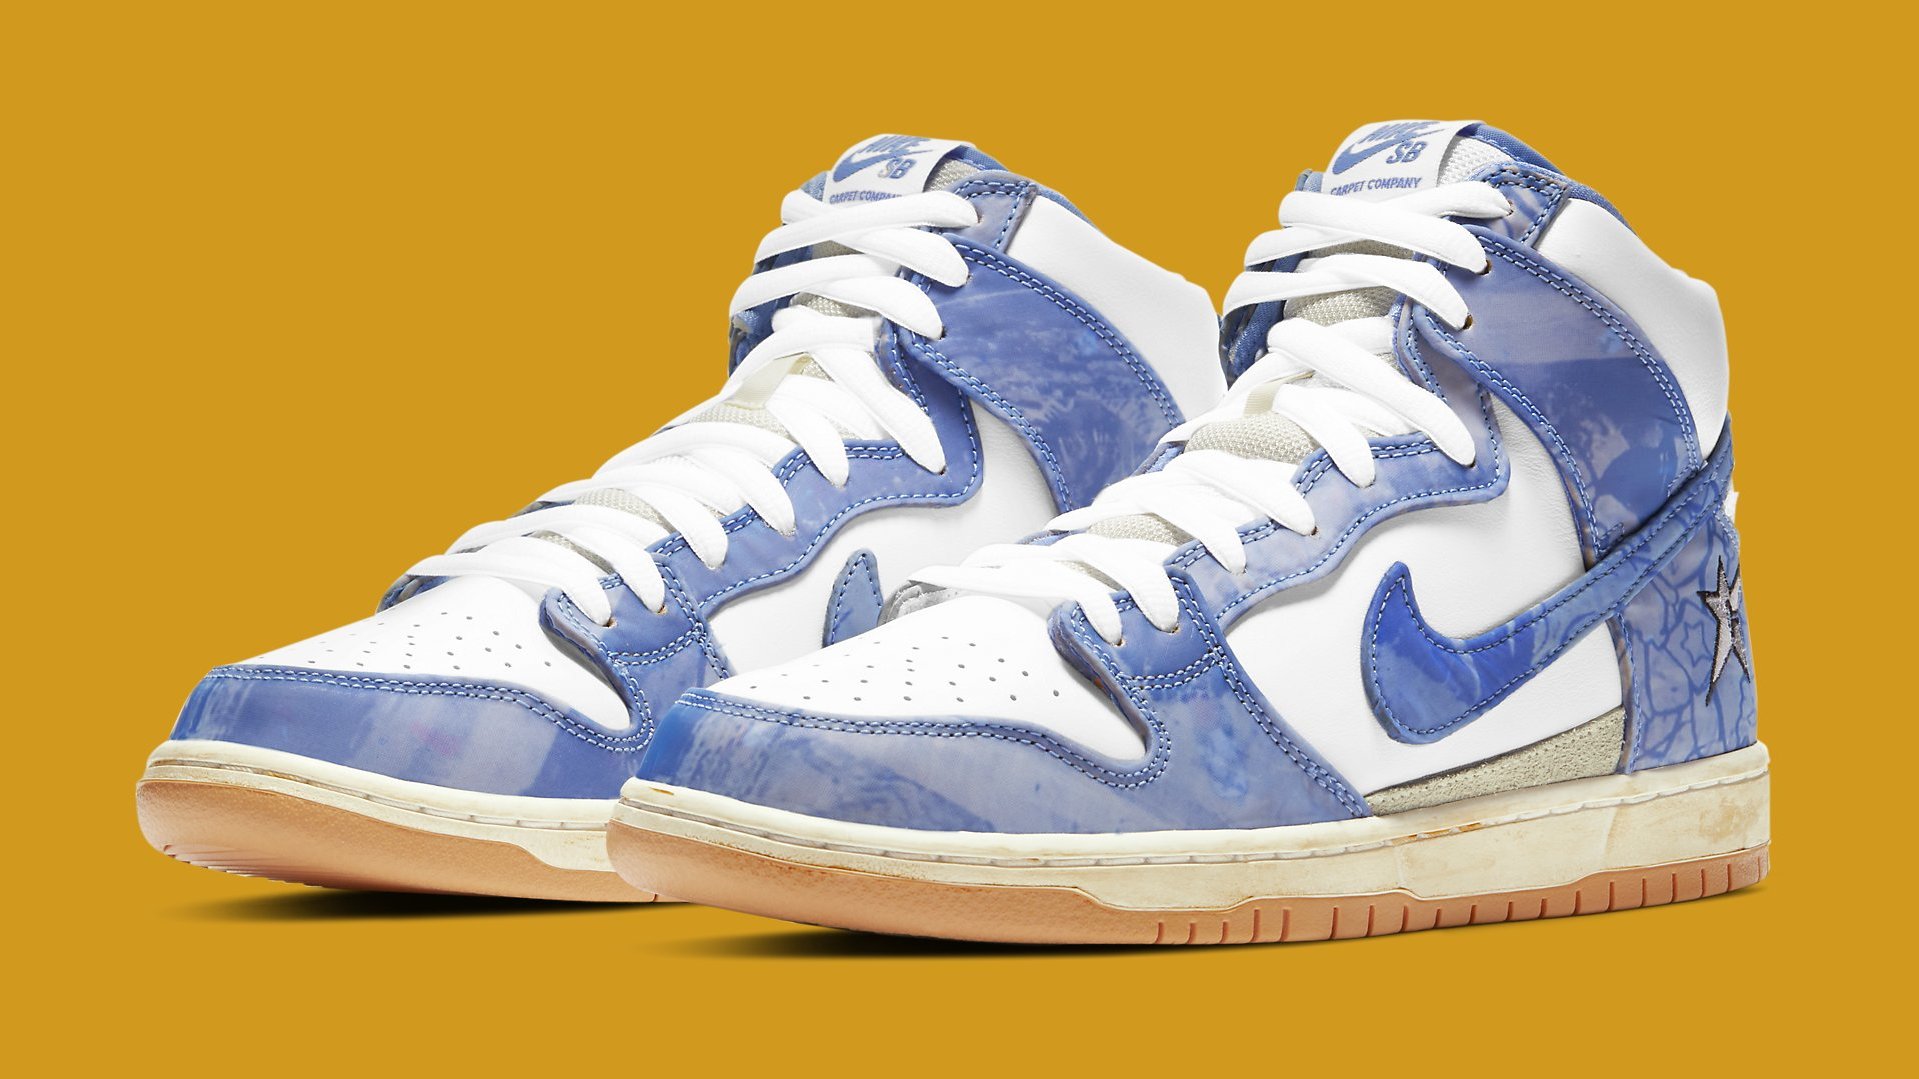 Carpet Company's Nike SB Dunk High Collab Release Date Confirmed